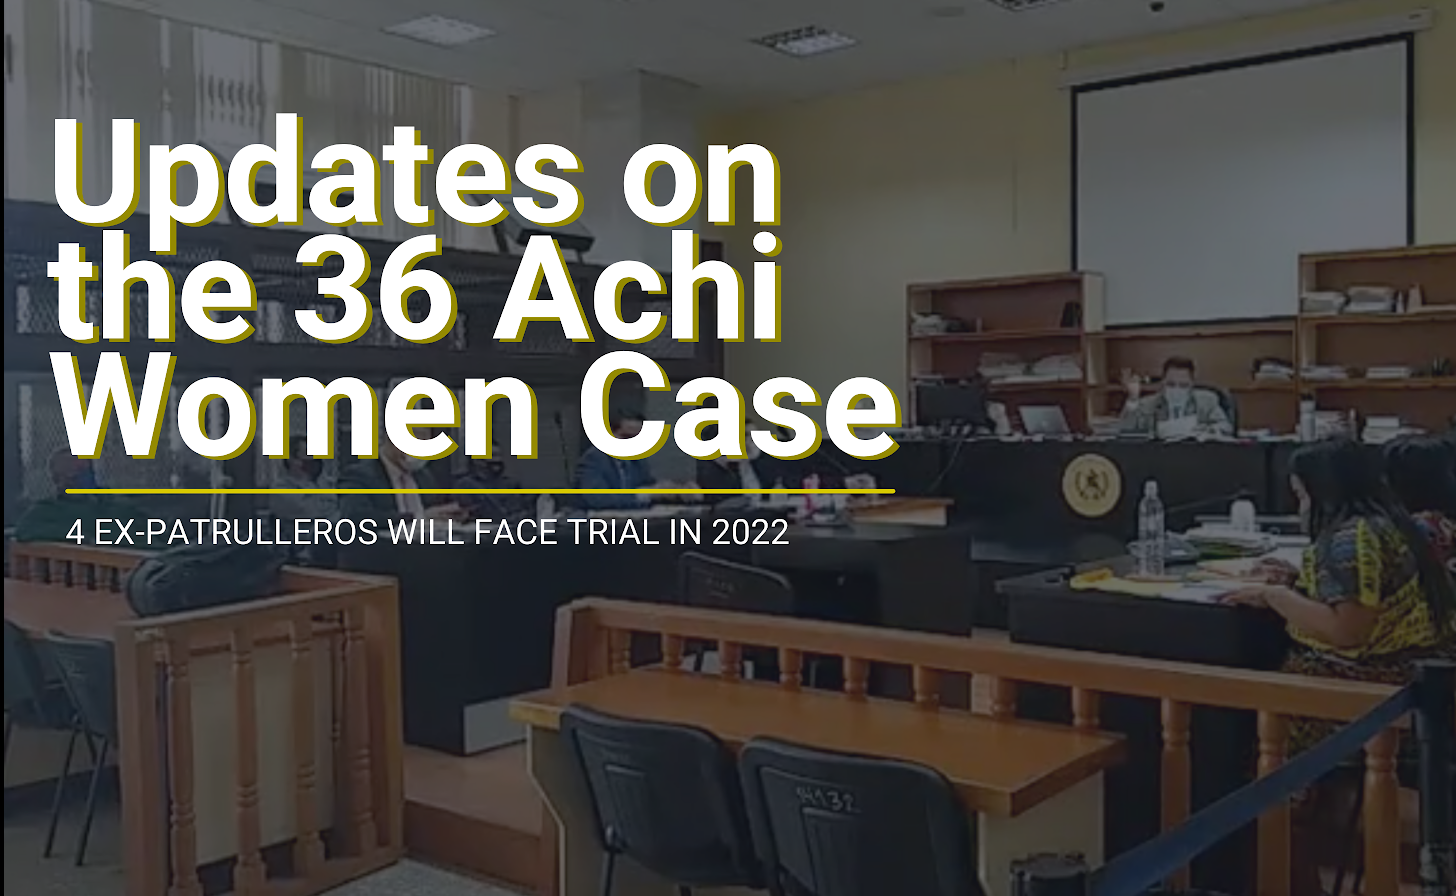 Image of a Guatemalan court room superimposed with "Updates on the 36 Achi women Case: 4 ex patrulleros will face trial in 2022"